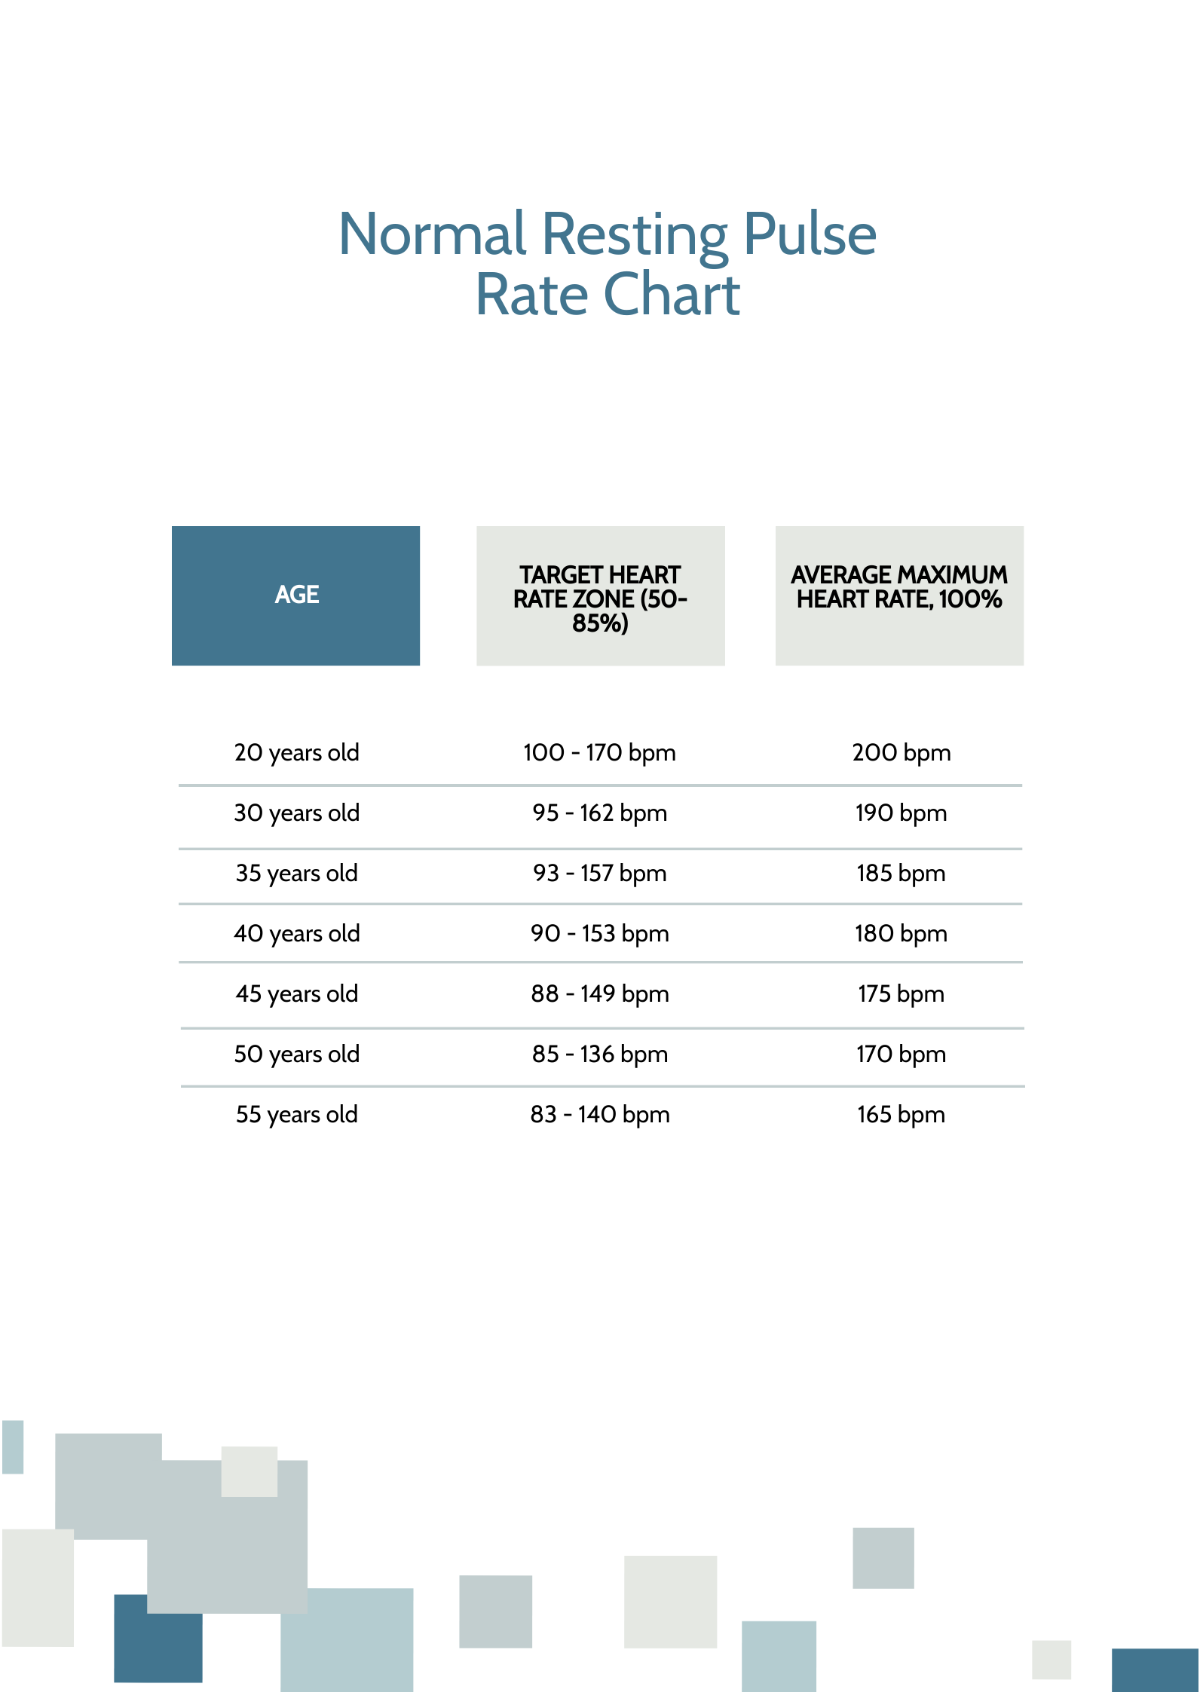 Normal Resting Pulse Rate Chart